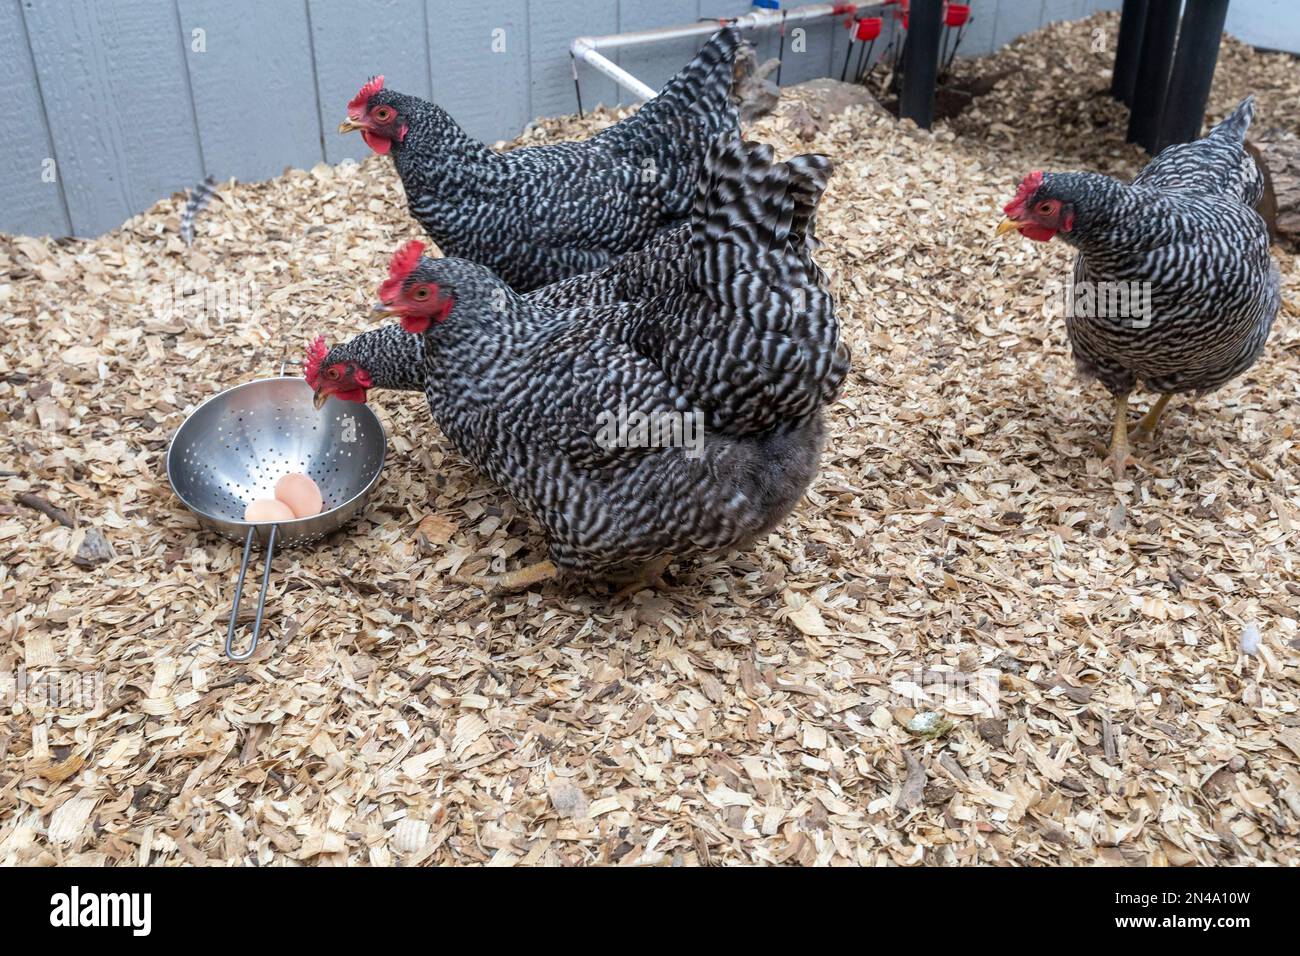 Denver, Colorado - Barred Rock chickens inspect eggs which are being collected from a chicken coop. Stock Photo